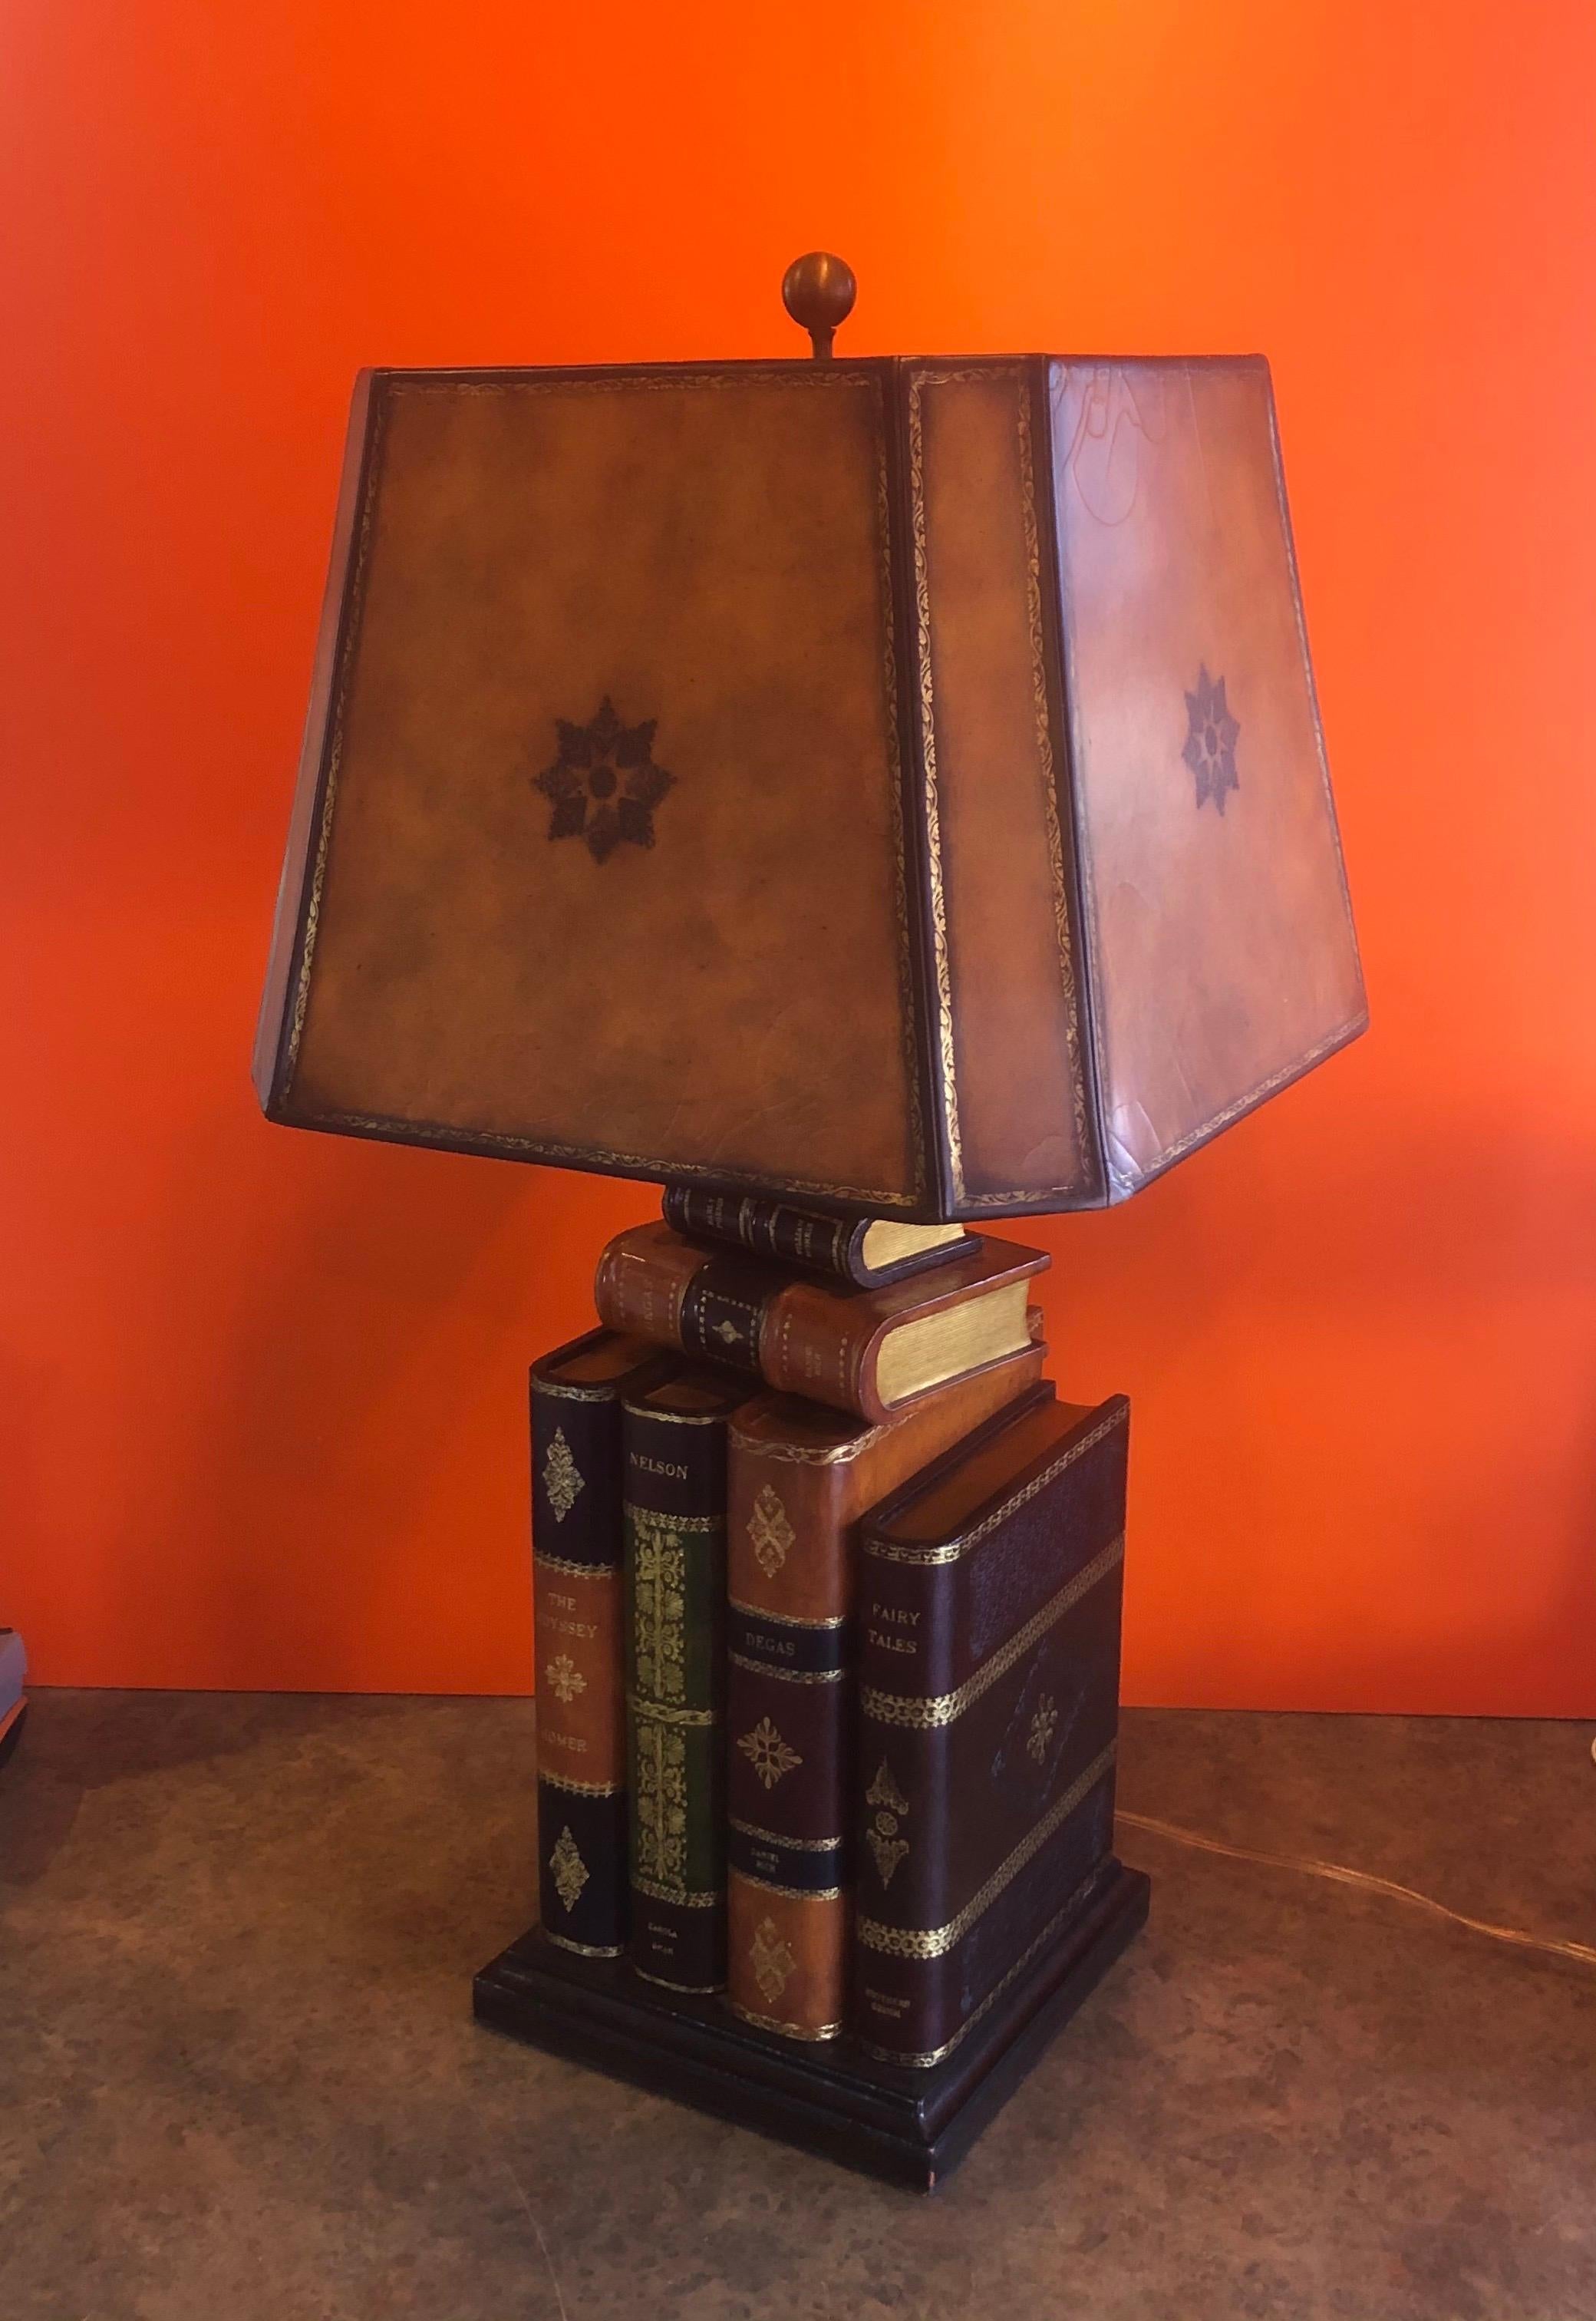 Tooled leather faux books table lamp by Maitland Smith, circa 1990s. The lamp is very heavy and extremely well made and comes with the original embossed leather lamp shade. The lamp has a tree-way brass socket and measures 16.5